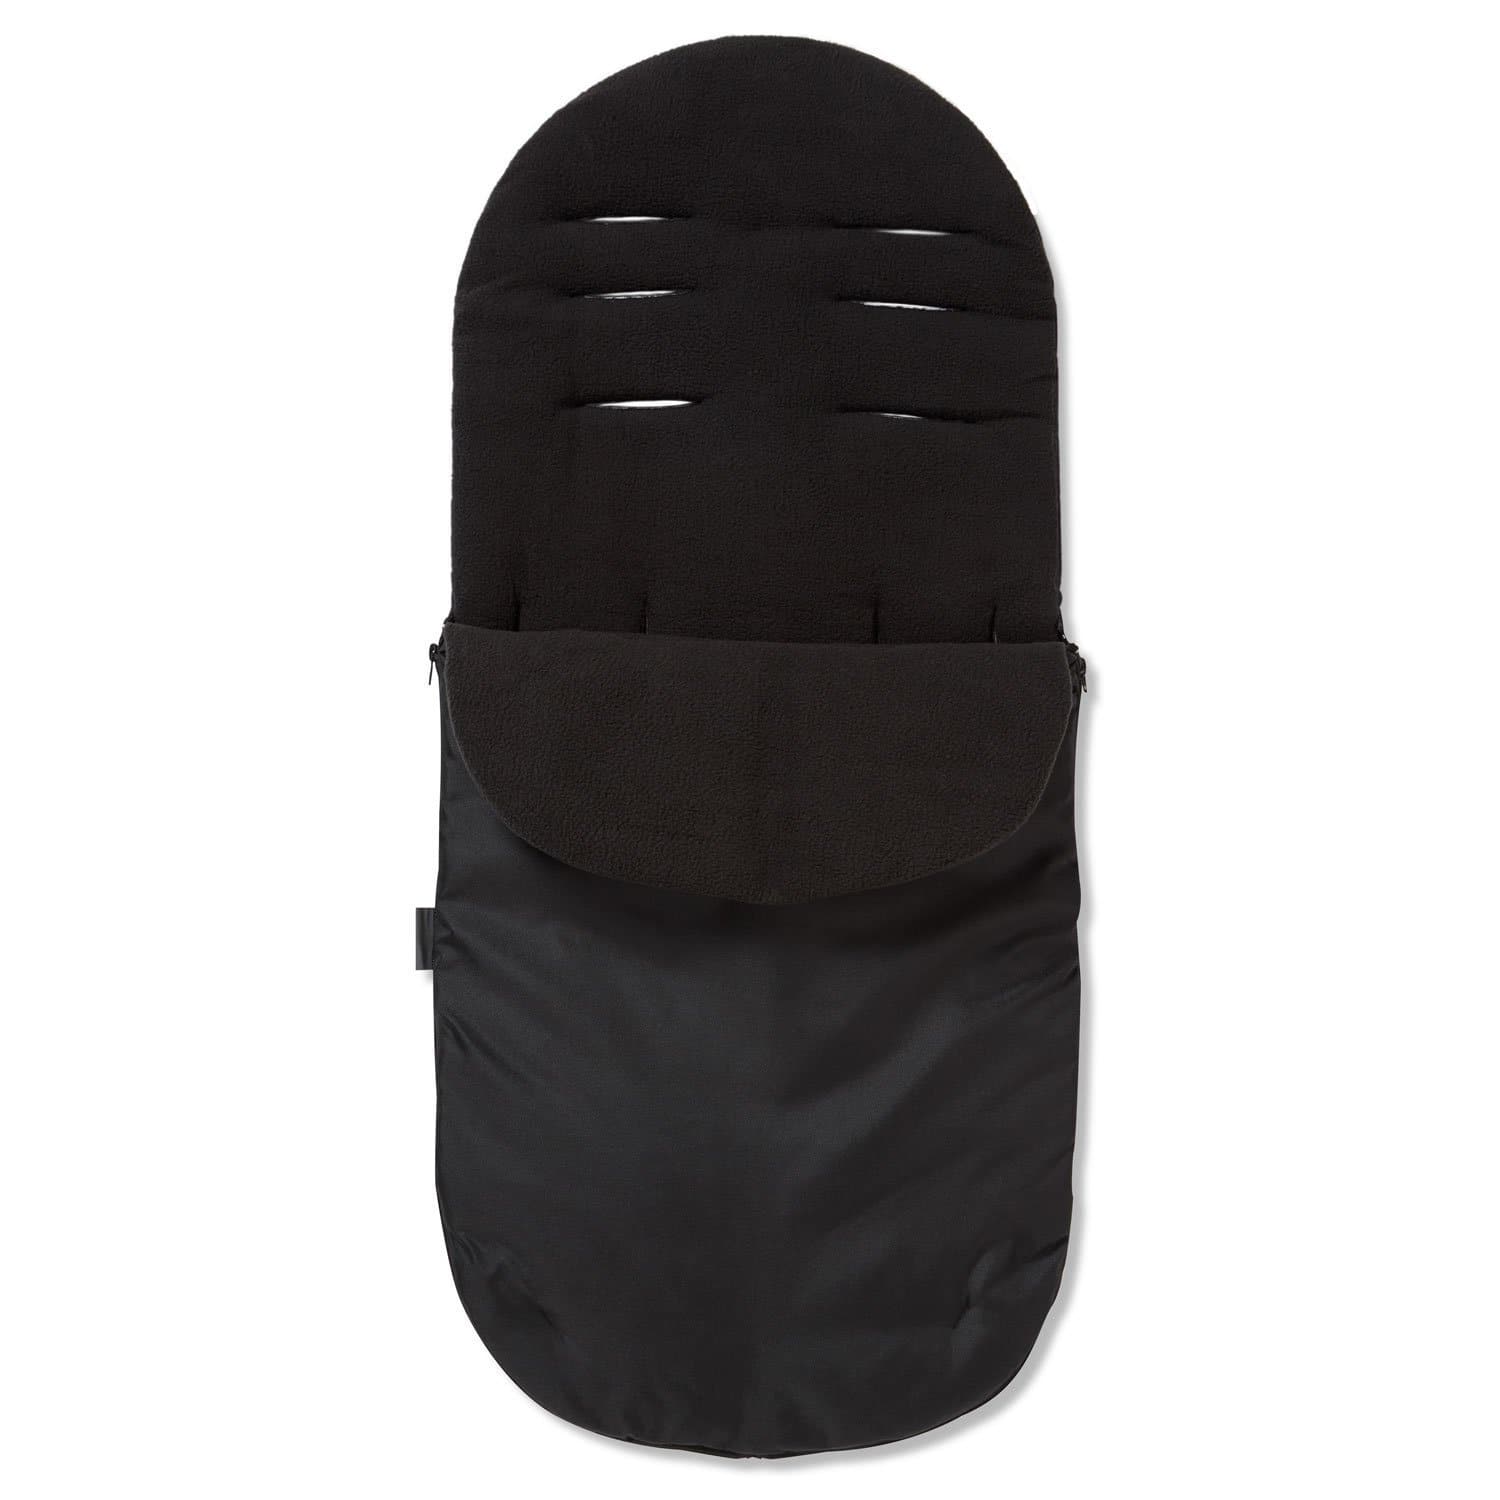 Footmuff / Cosy Toes Compatible with Chicco - Black / Fits All Models | For Your Little One